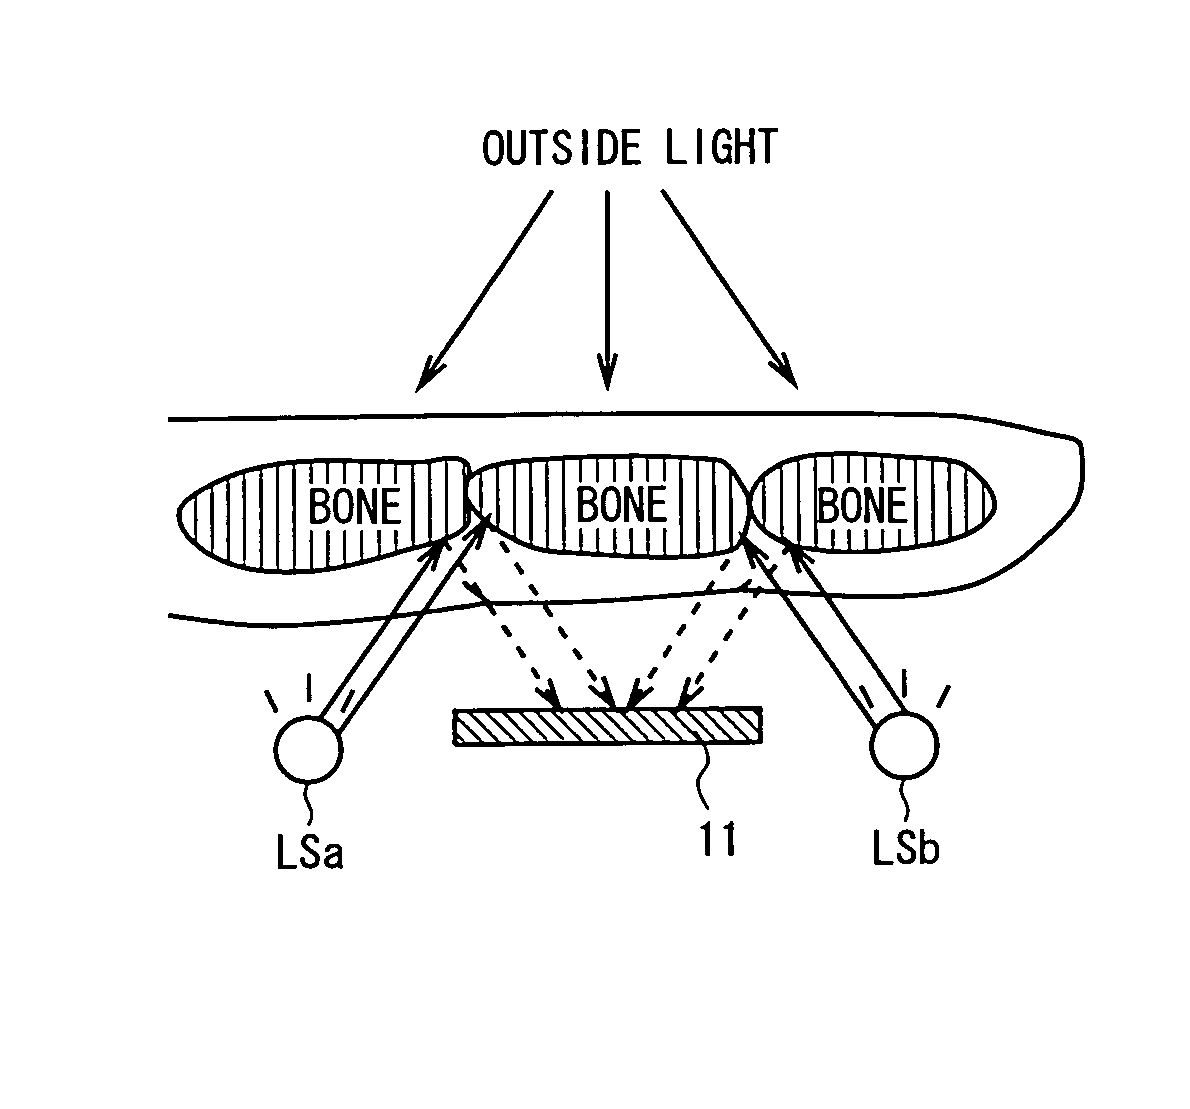 Image apparatus and method, and communication terminal device